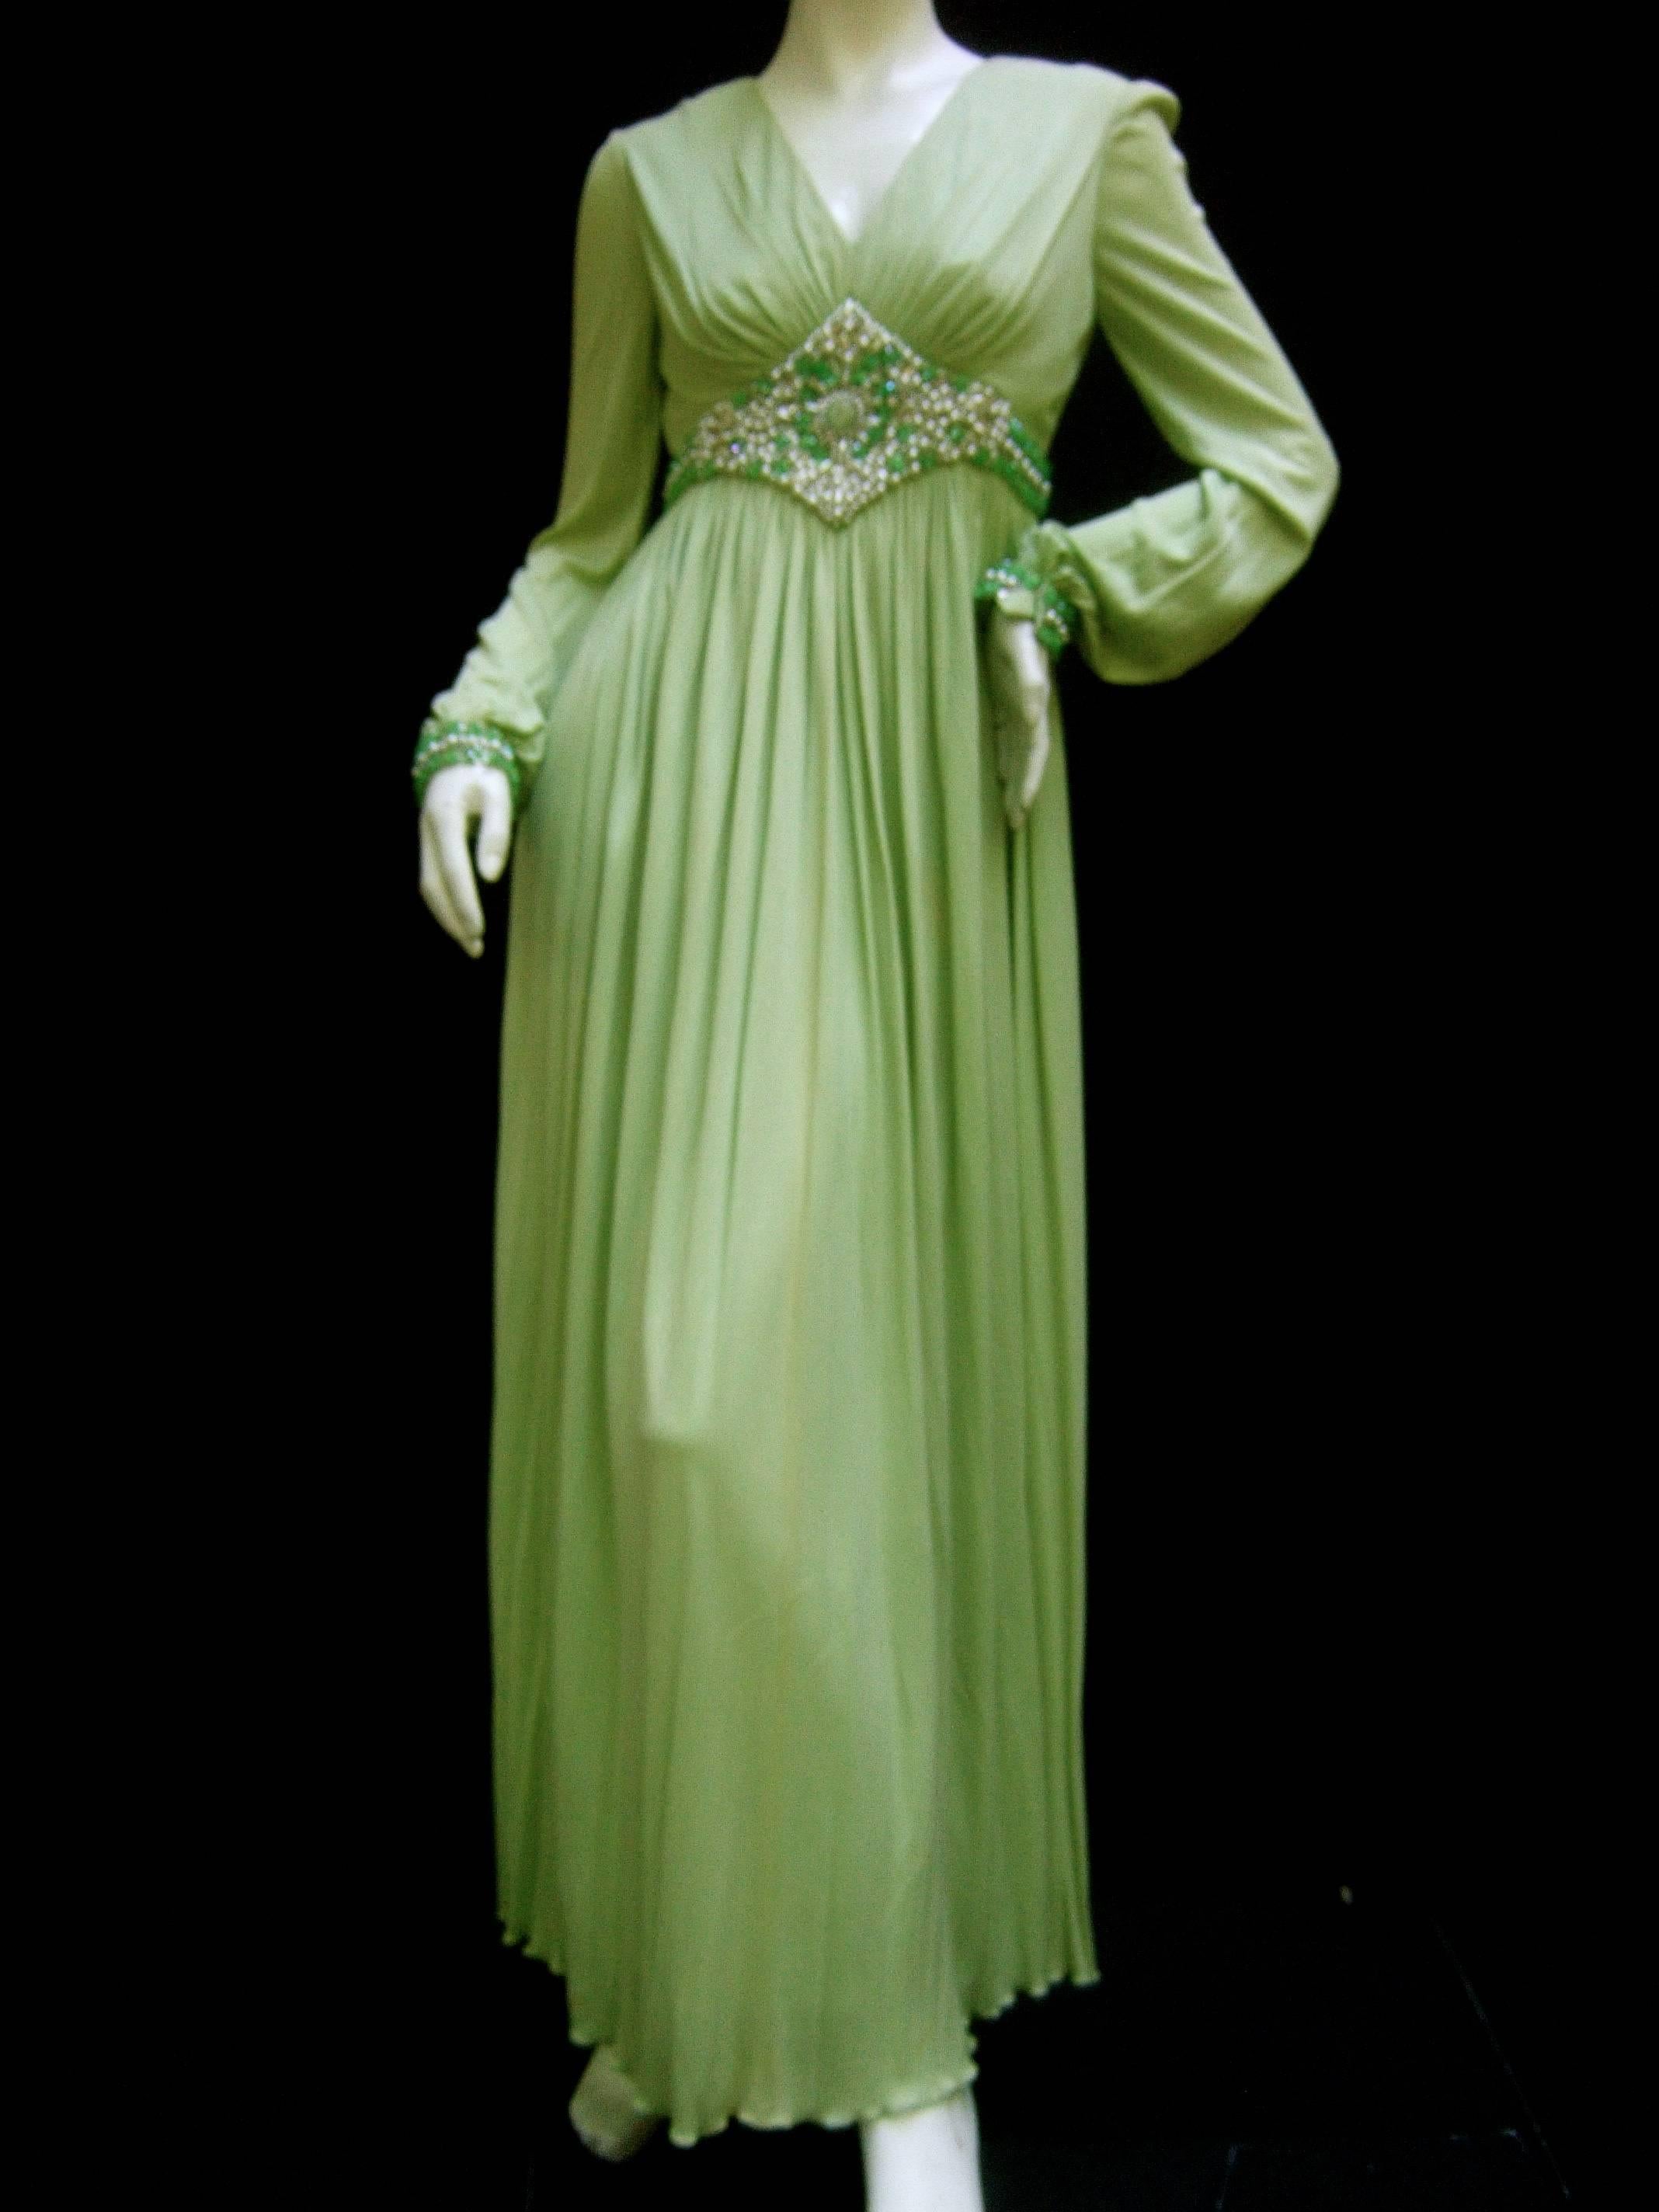 1970s Mint green matte jersey pleated gown designed by Malcolm Starr
The elegant Grecian style jersey gown is embellished with jeweled 
faux pearls and lucite mint green crystals. The center stone is a large
opaque green glass cabochon that runs